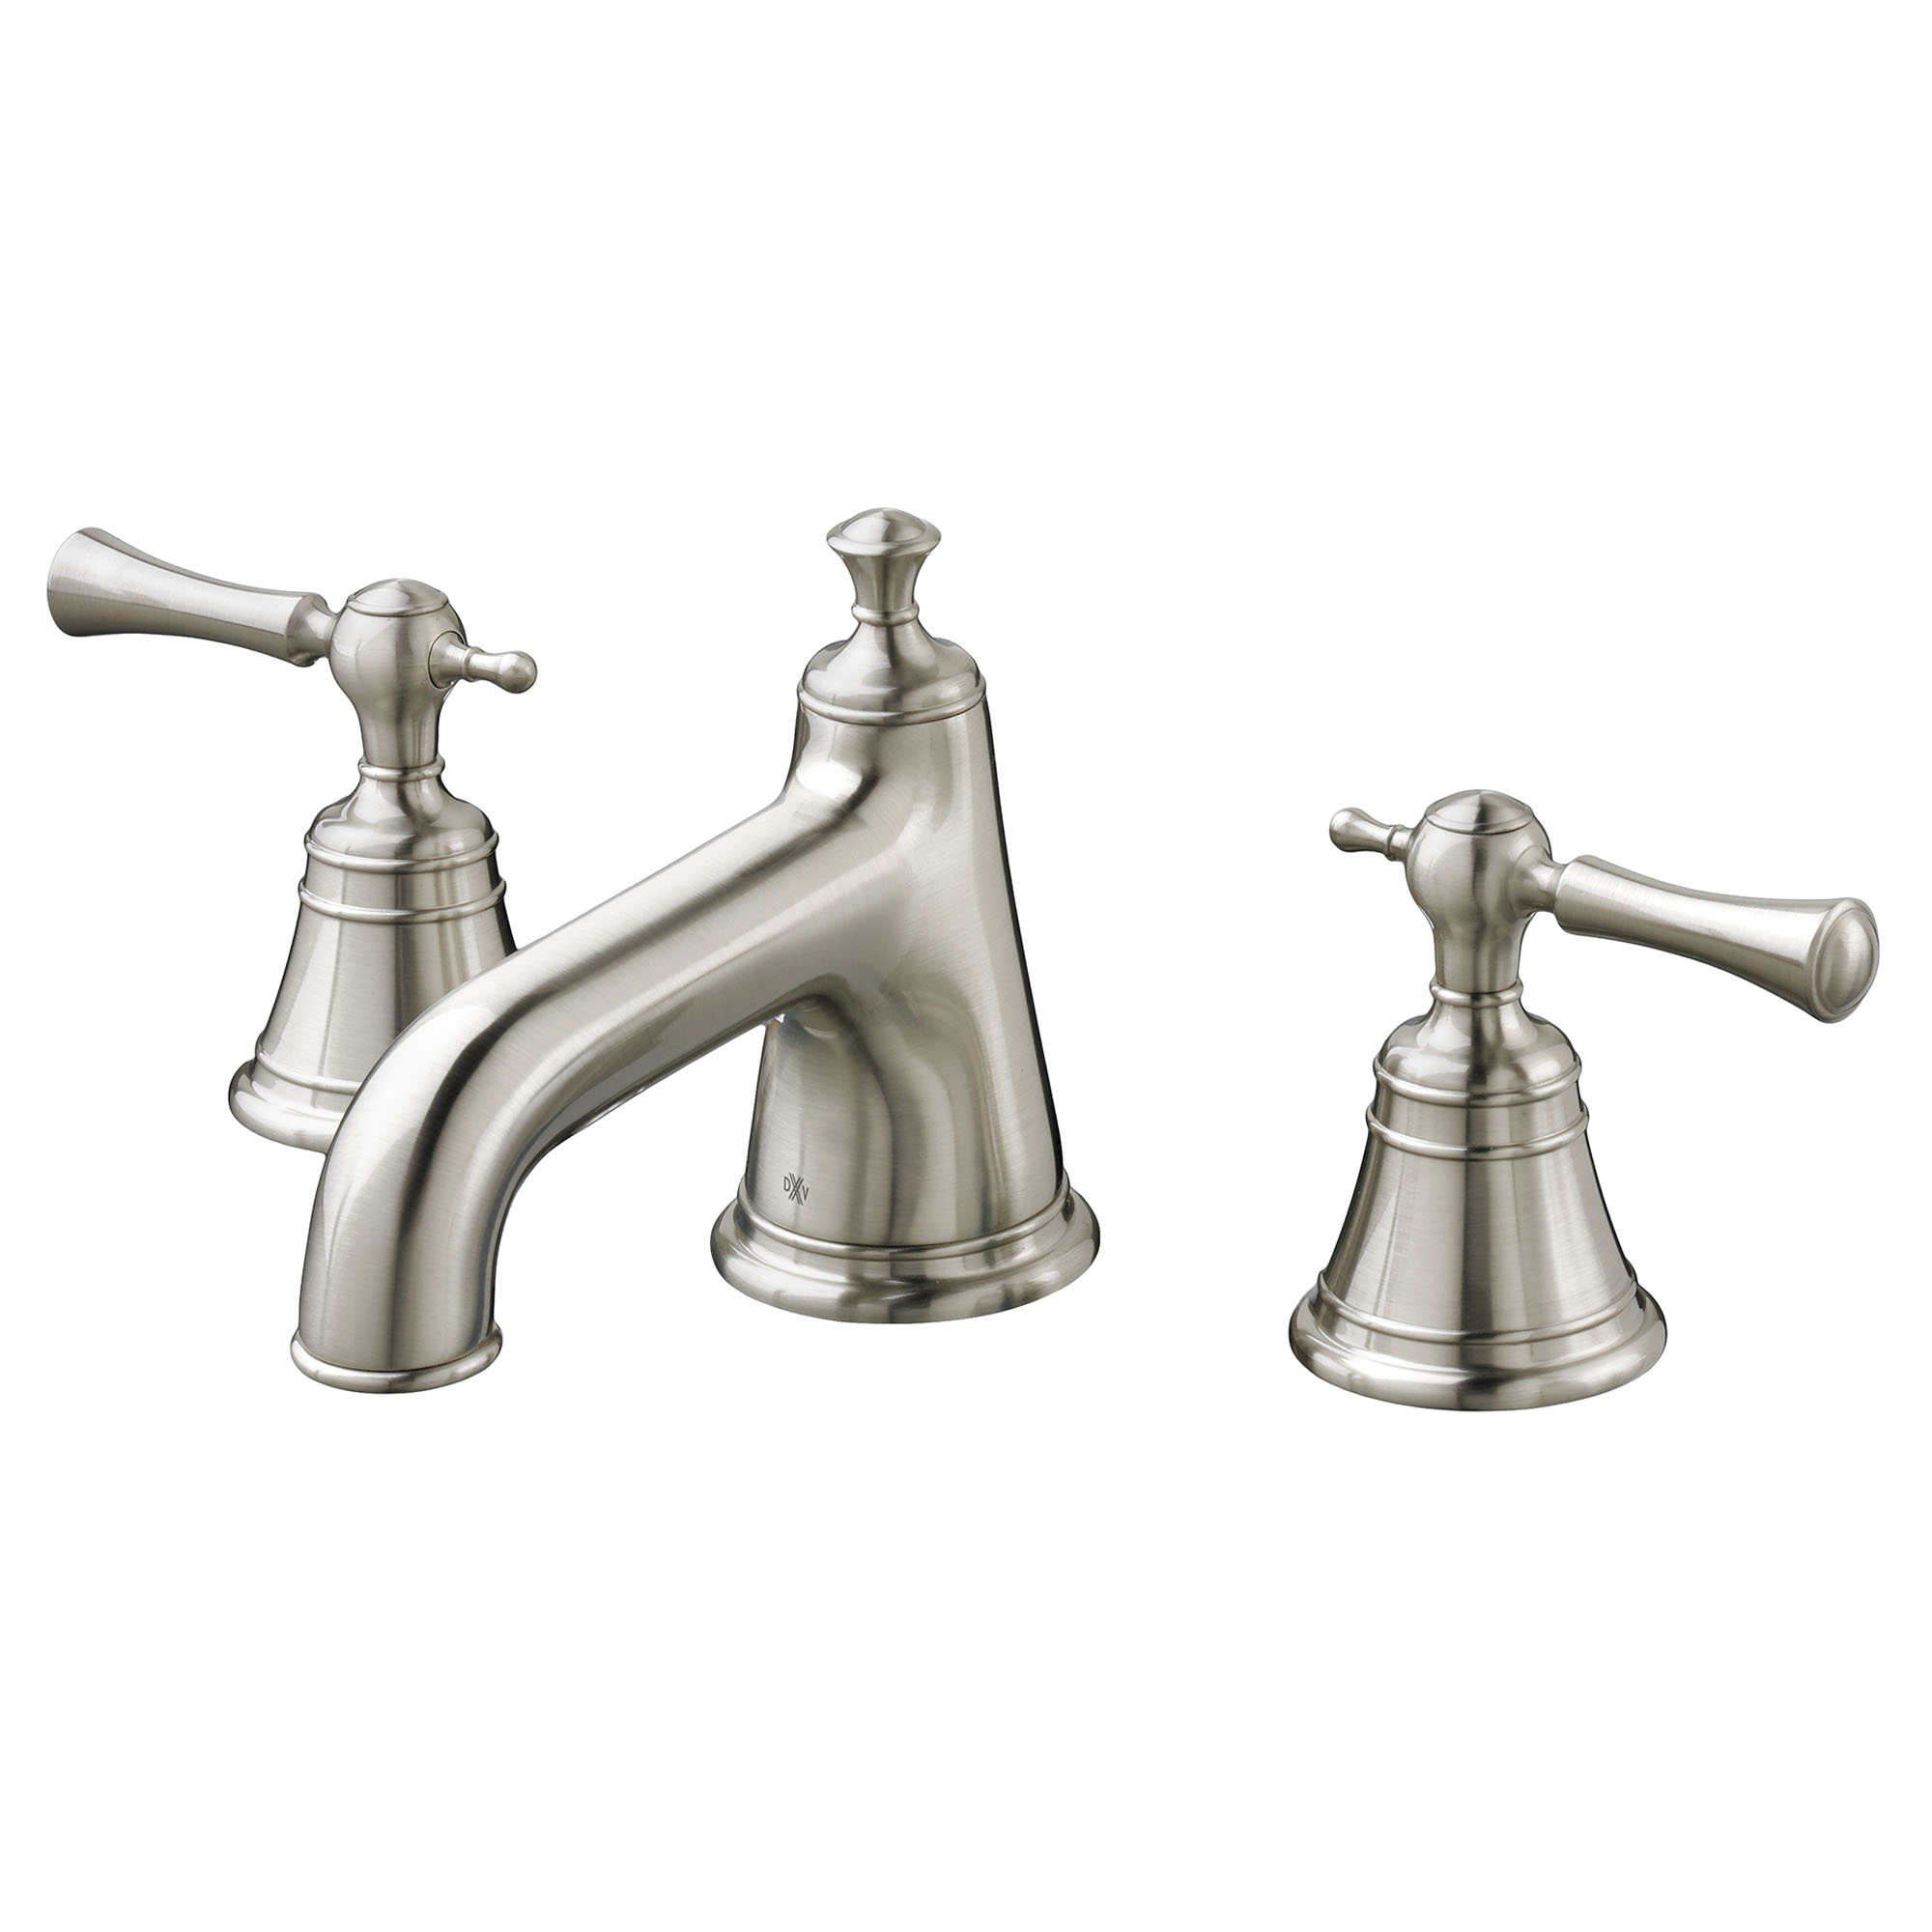 Randall® 2-Handle Widespread Bathroom Faucet with Lever Handles